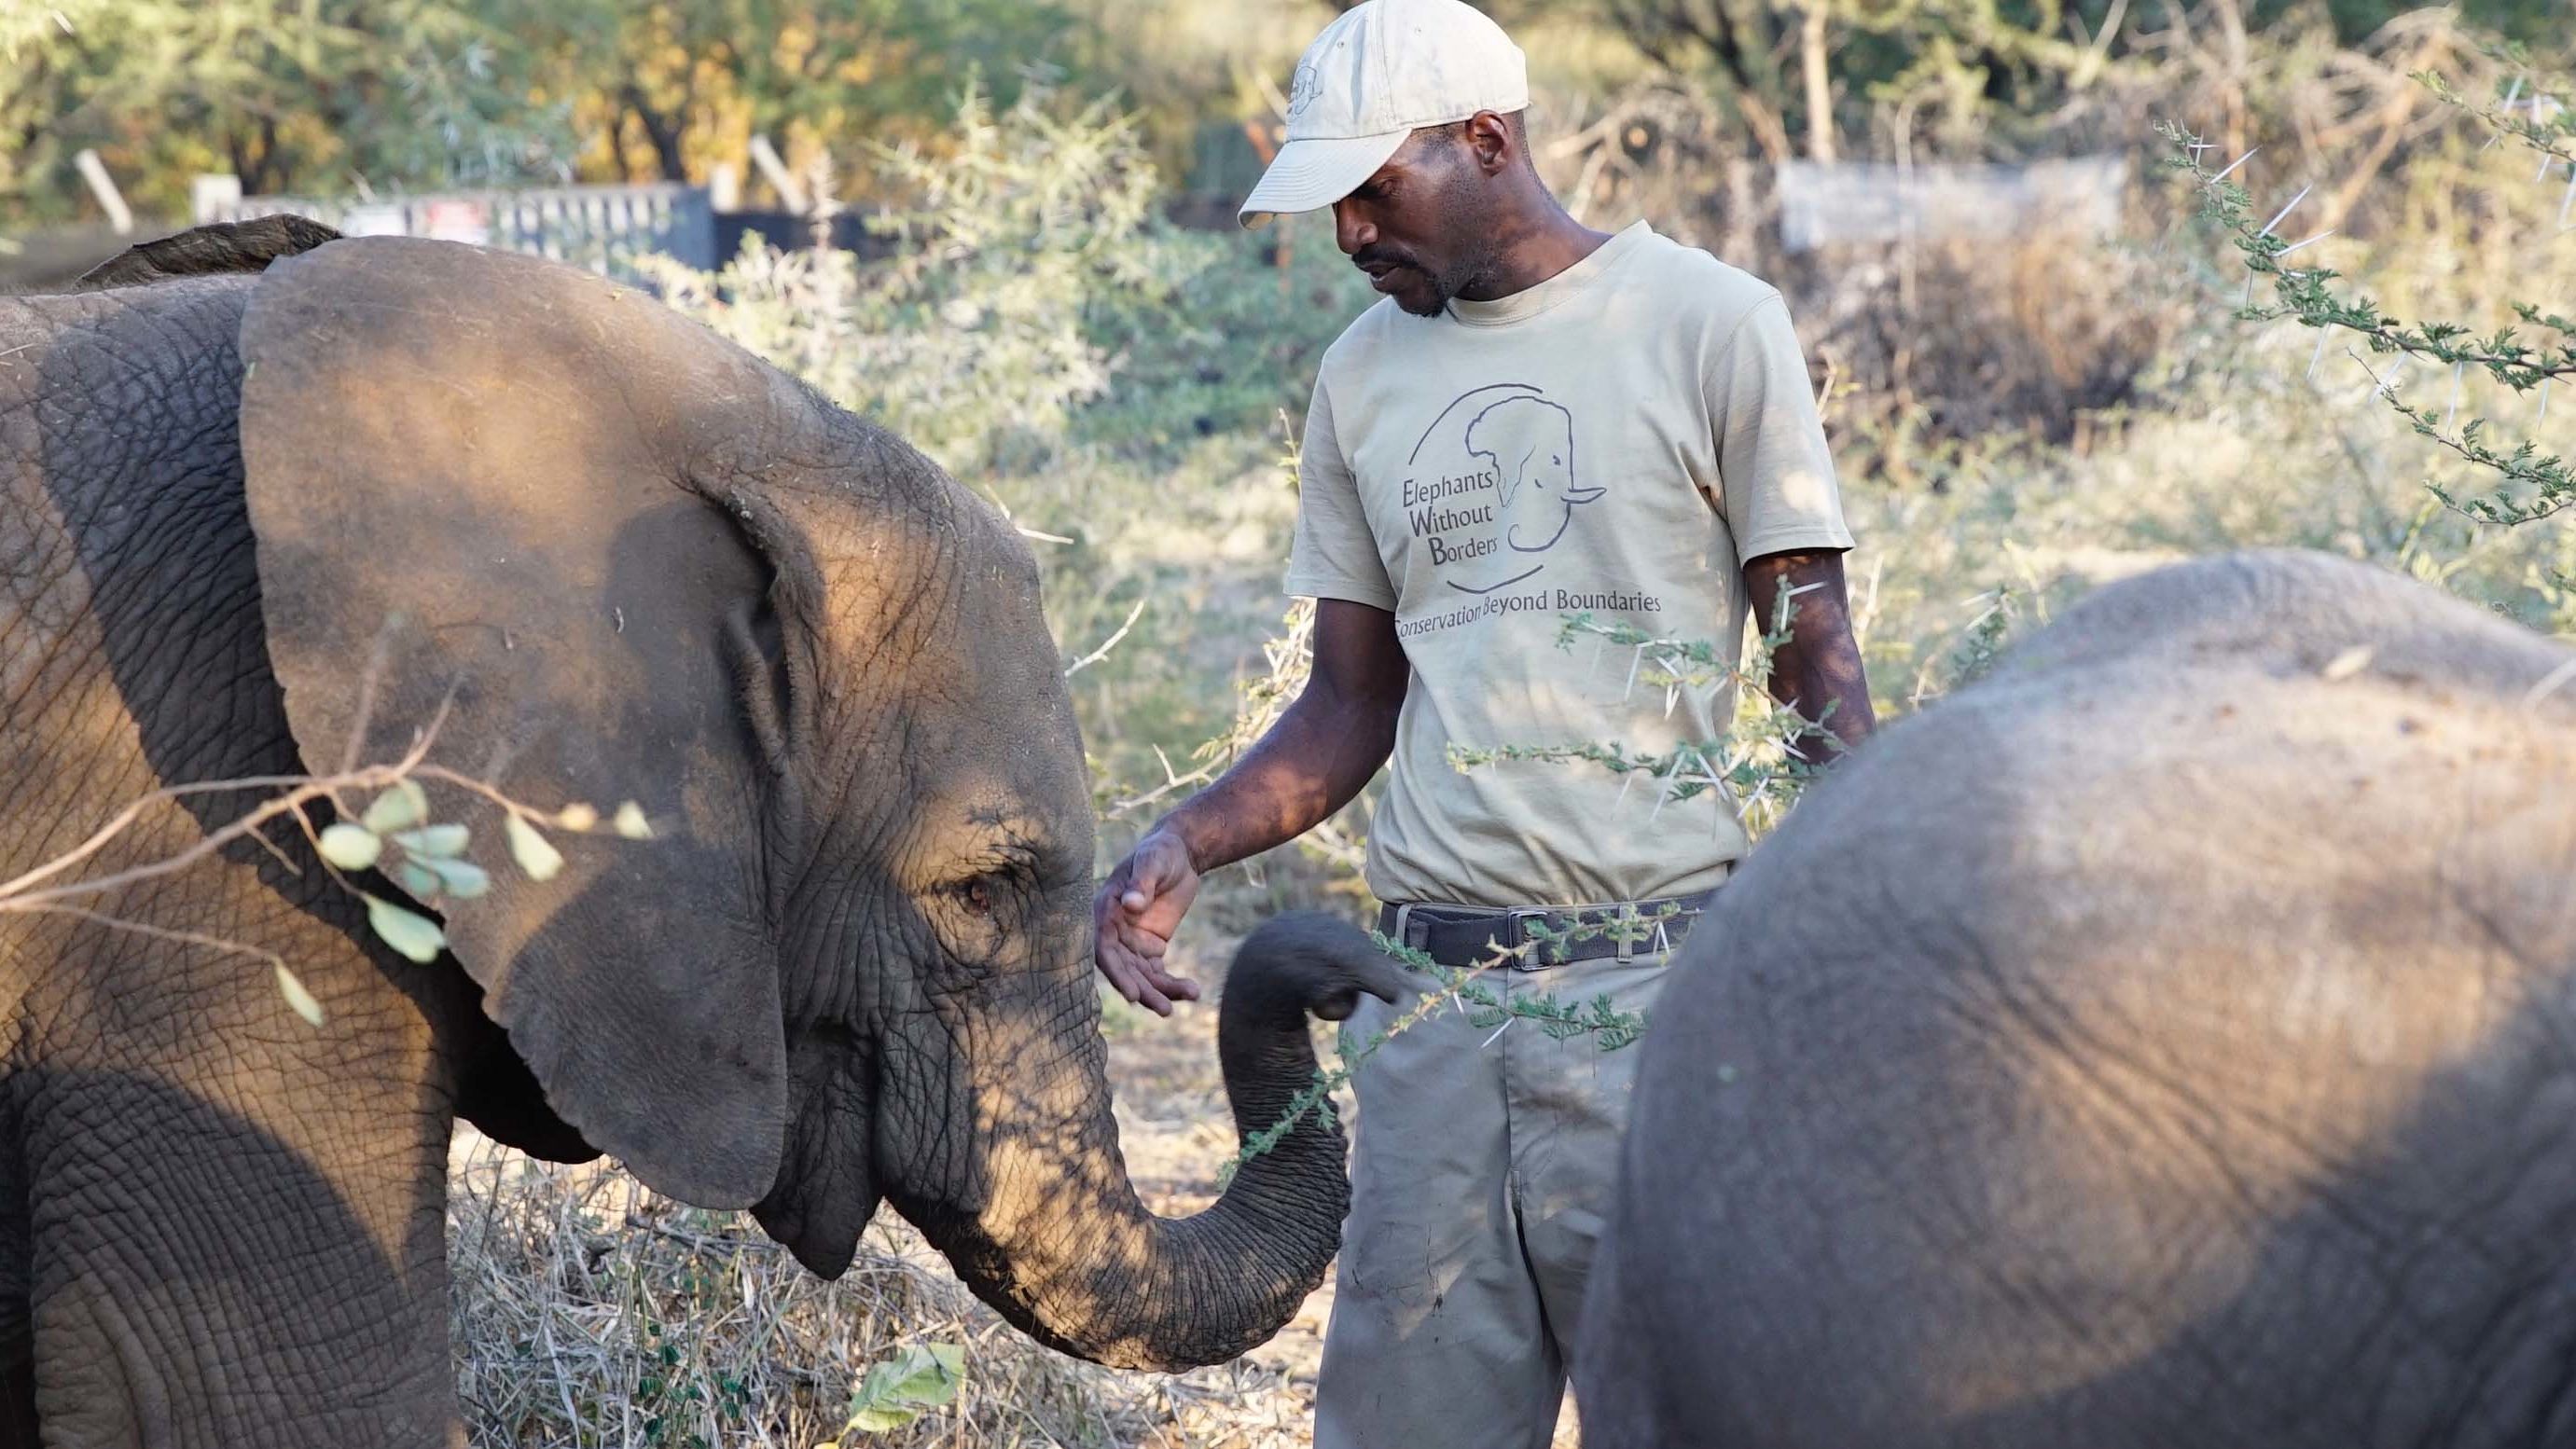 An Elephants without Borders elephant keeper feeds an animal that was orphaned due to human-animal conflict.